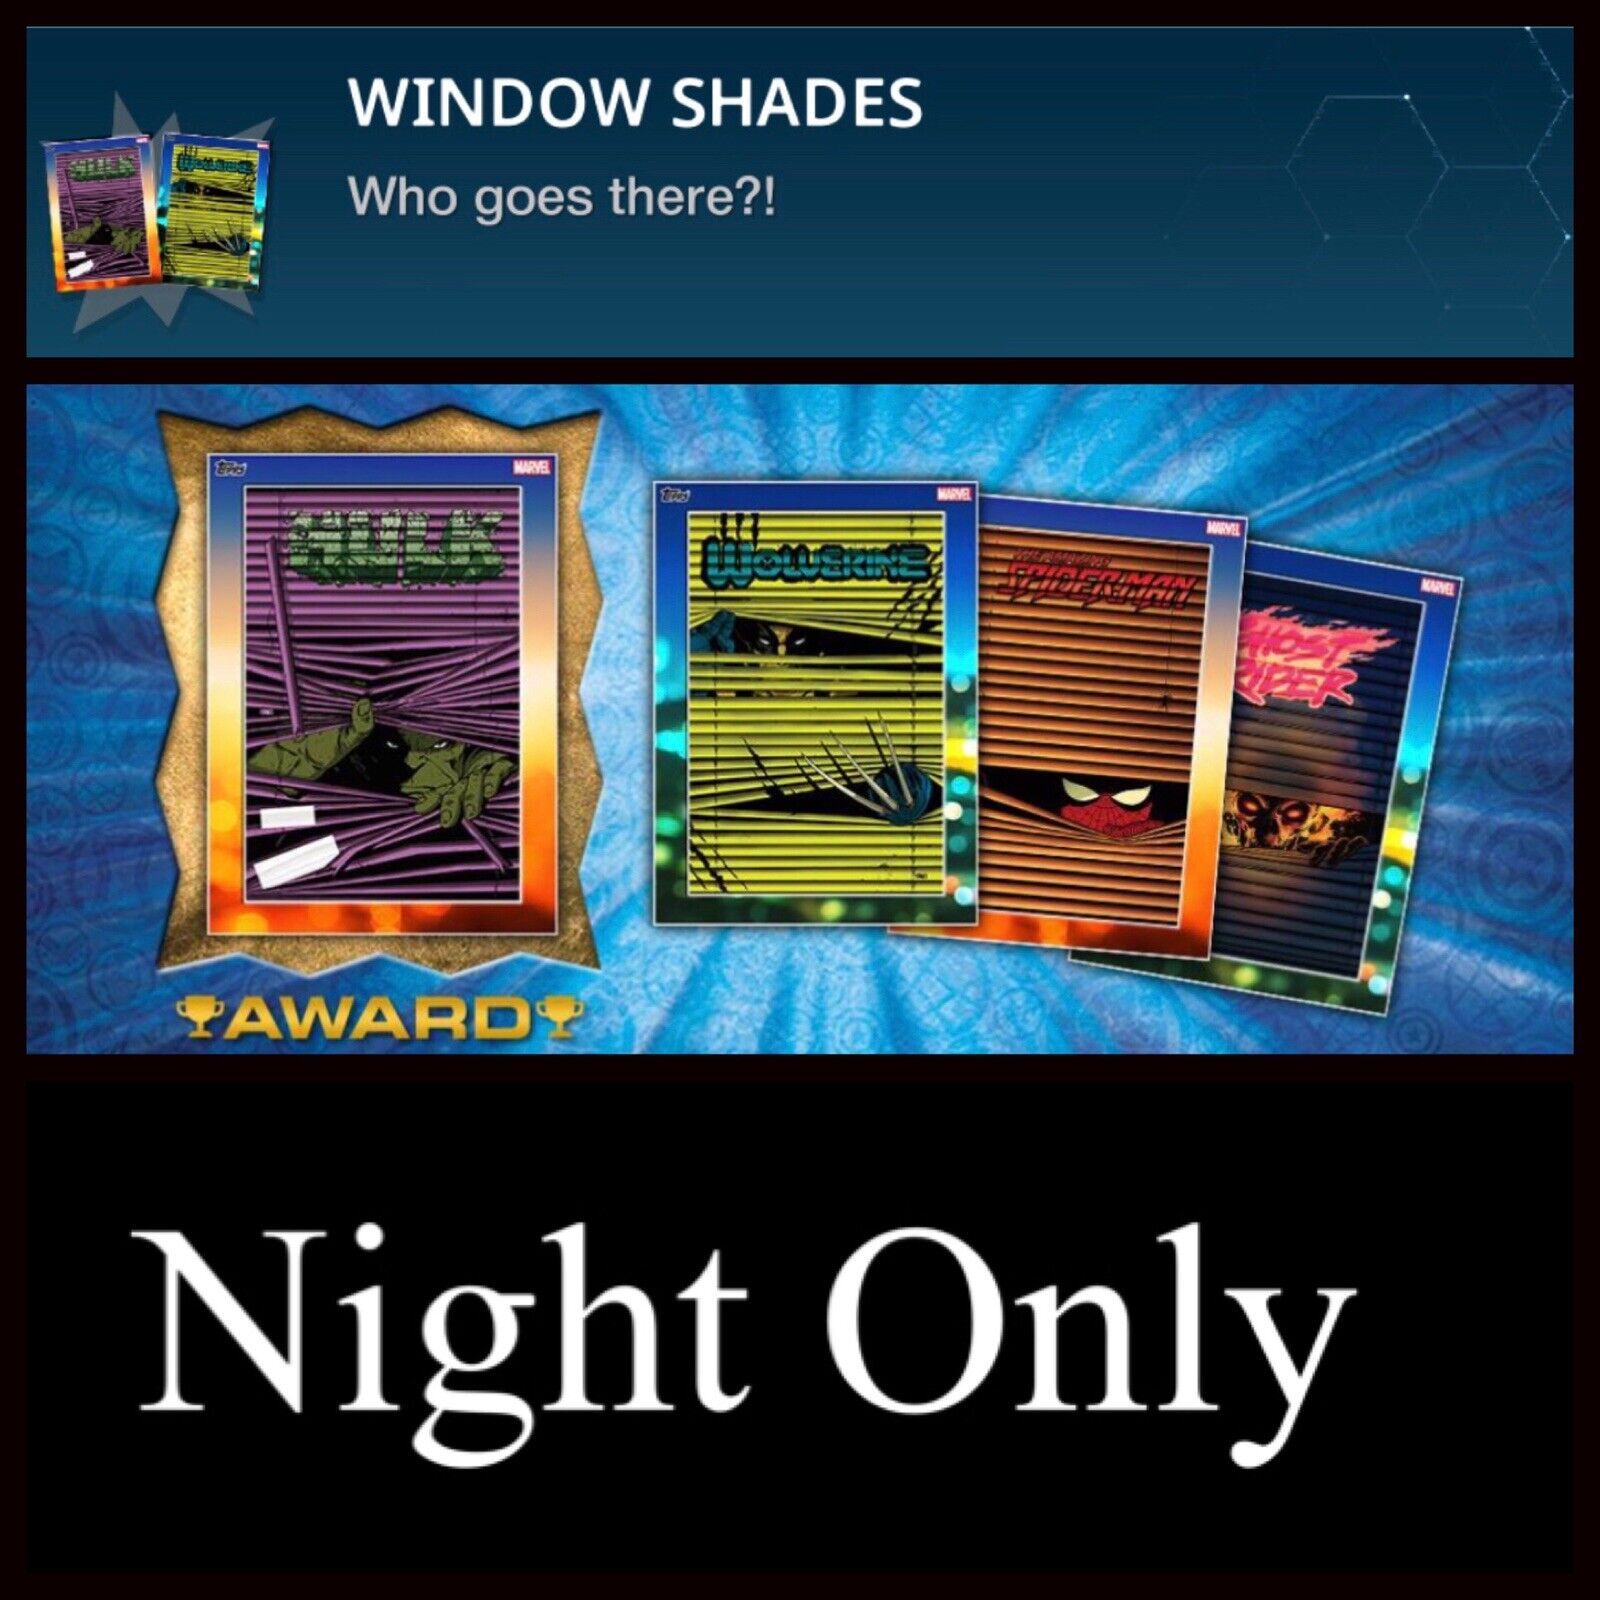 WINDOW SHADES-5 CARD SET-NIGHT RARE ONLY-TOPPS MARVEL COLLECT